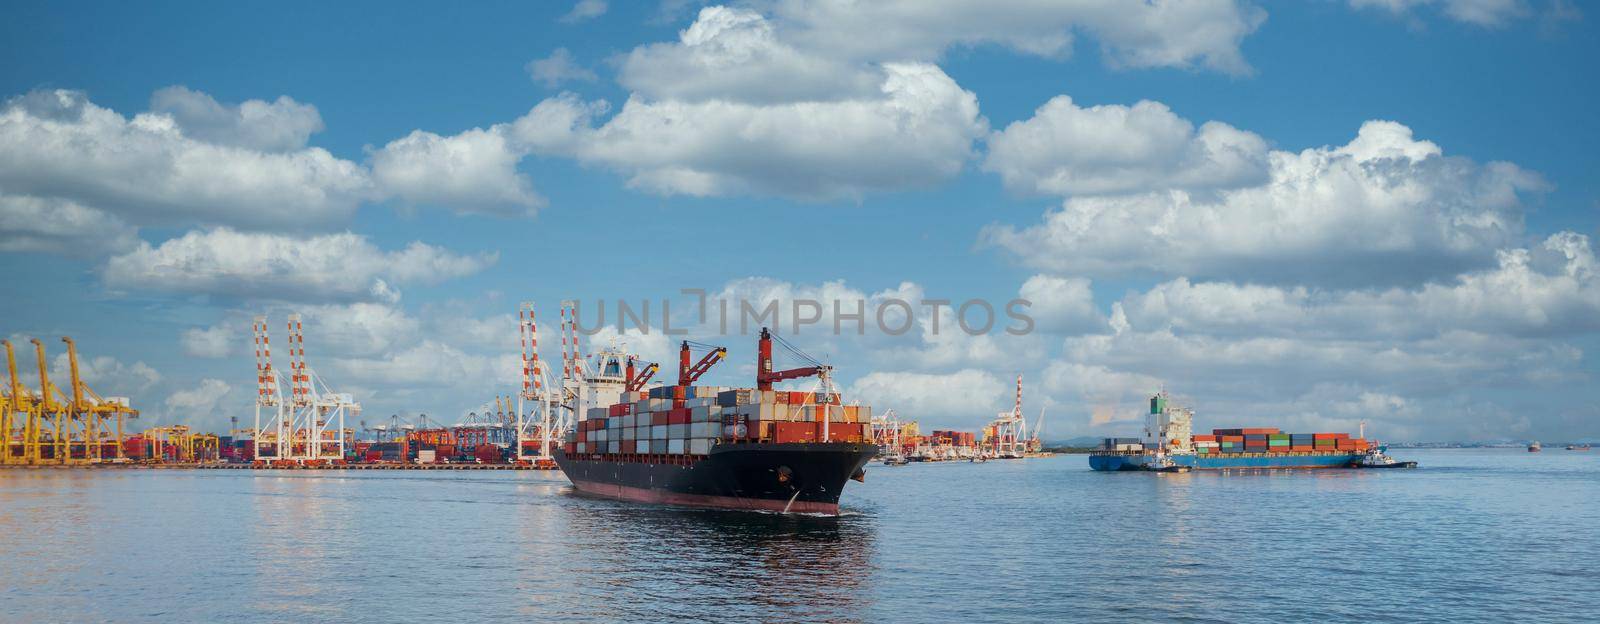 Aerial view container ship at industrial port import export global business company logistic transportation international by container ship, Container cargo vessel freight ship industrial. by AvigatoR